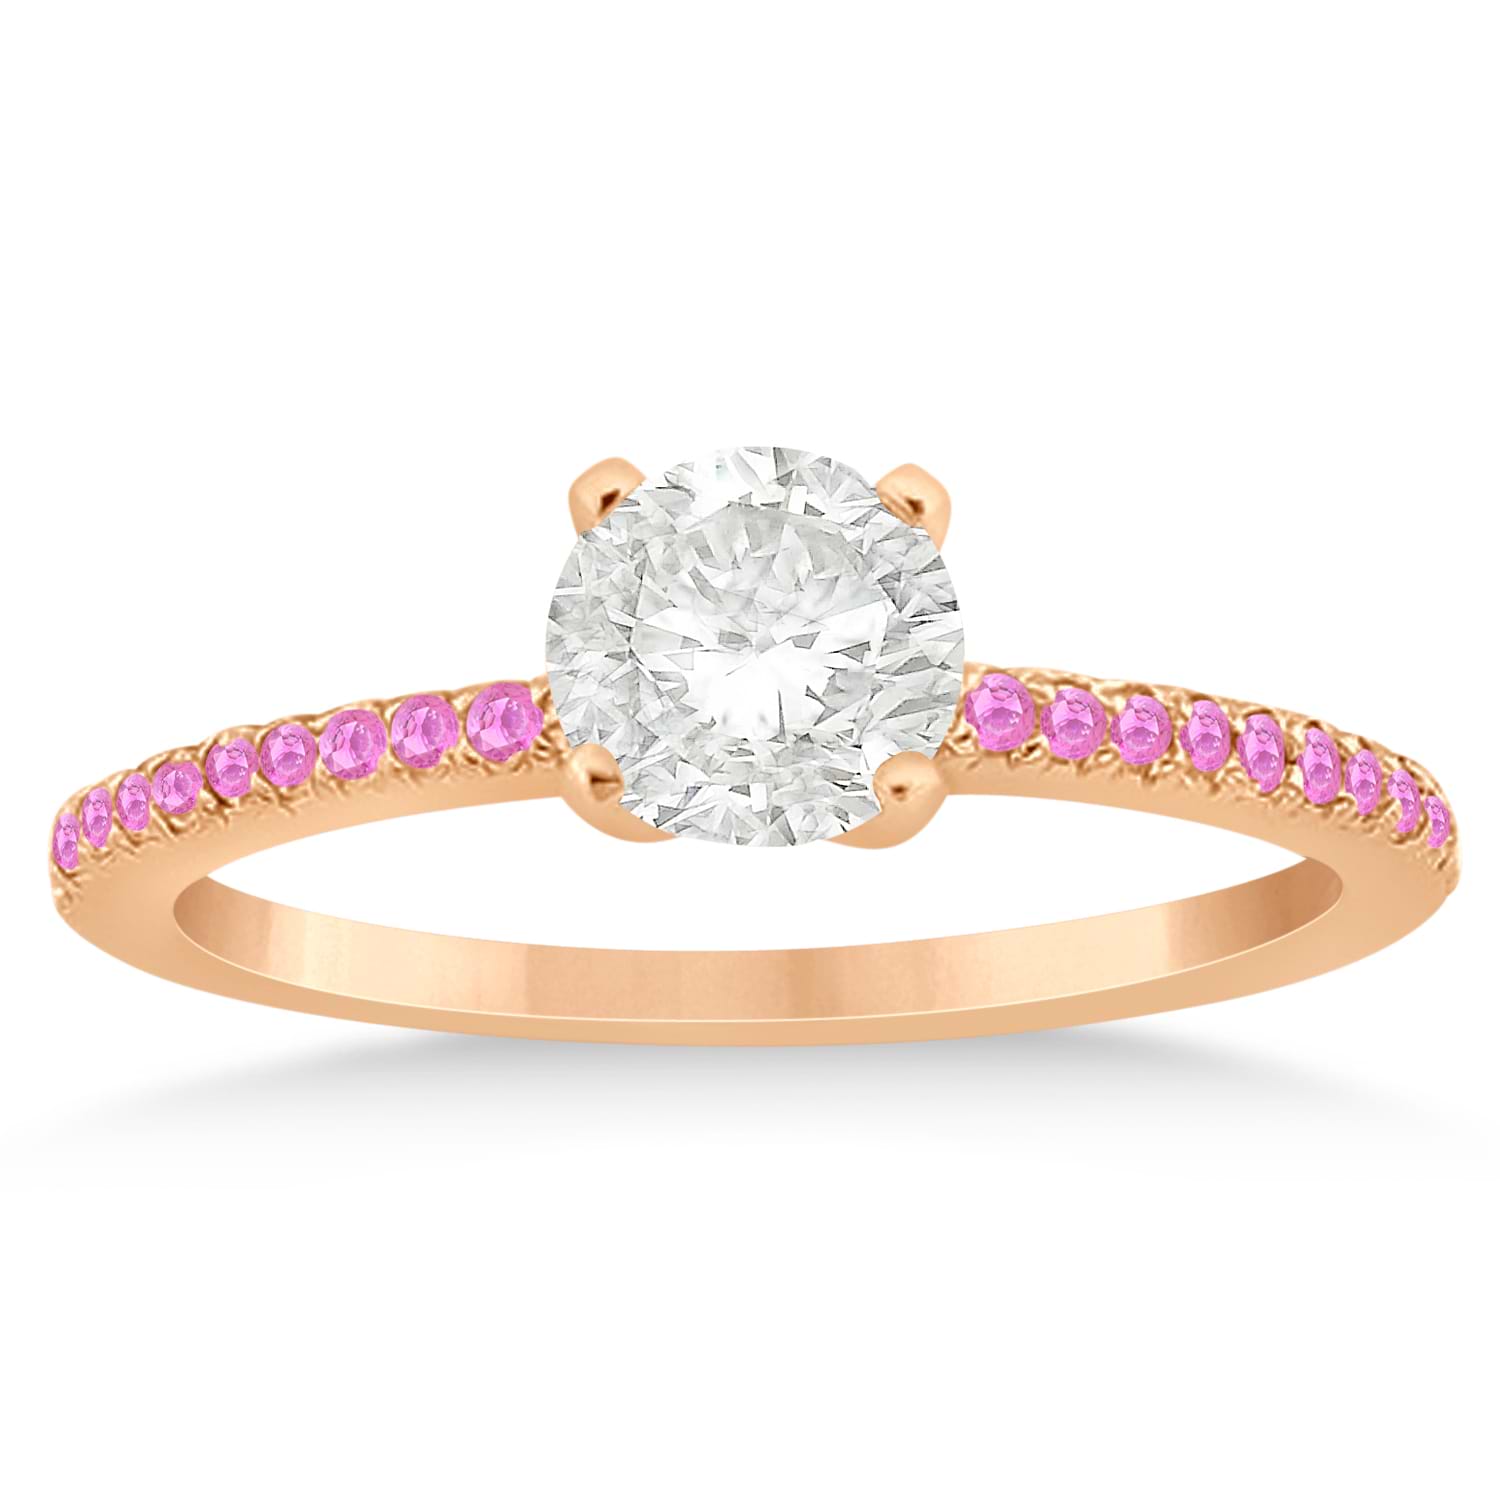 Pink Sapphire Accented Engagement Ring Setting 14k Rose Gold 0.18ct